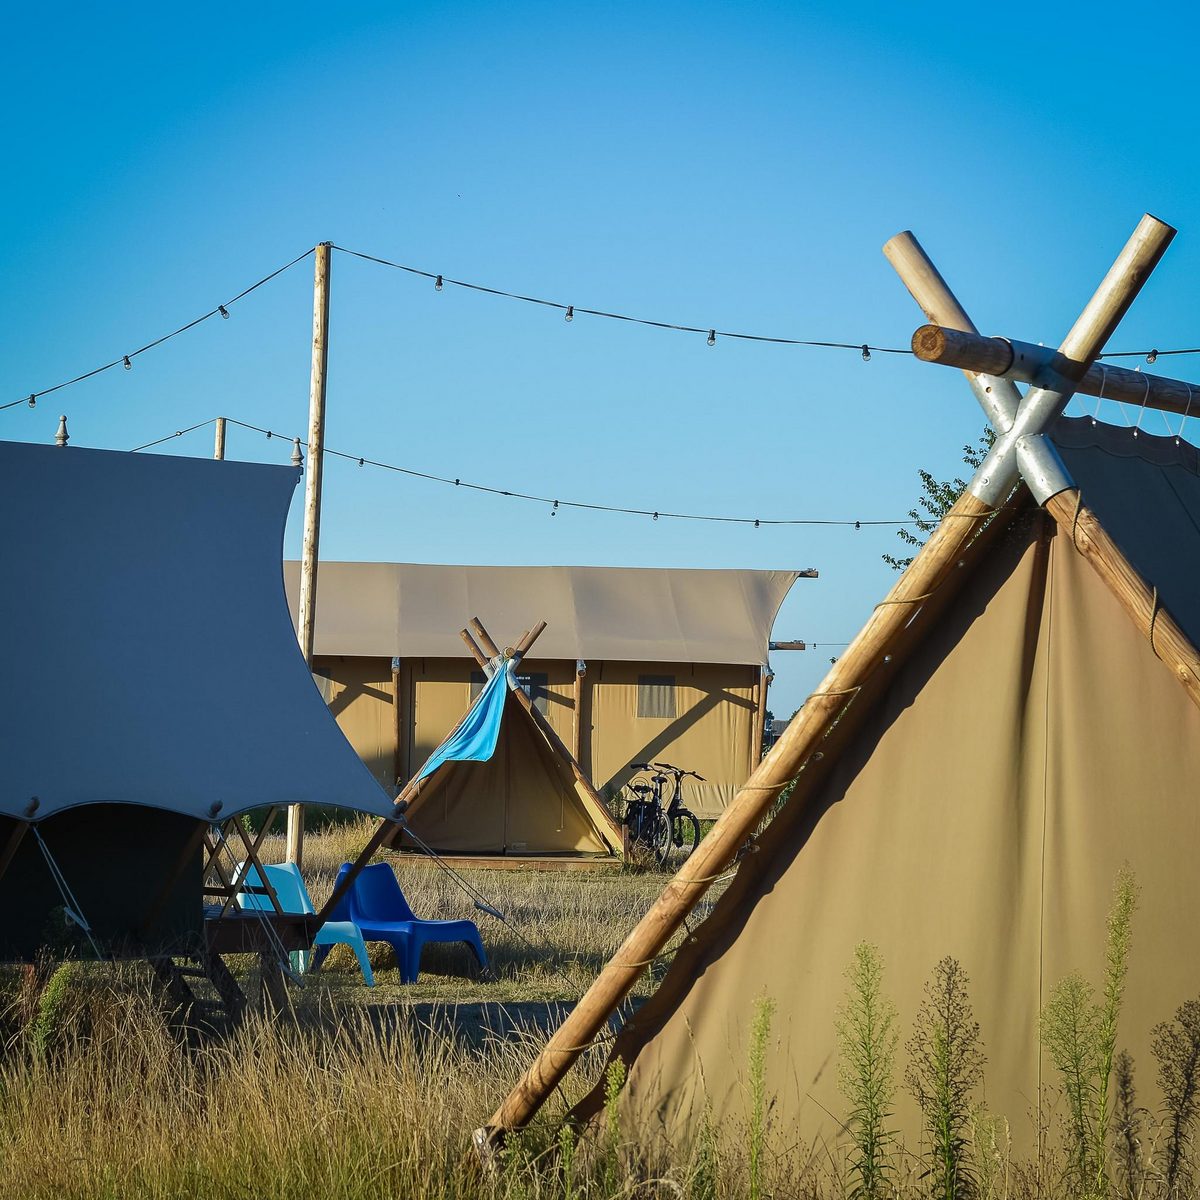 Pop-up glamping: 6x Awaji 2P + 6x Bell tent 2P | 24 pers.